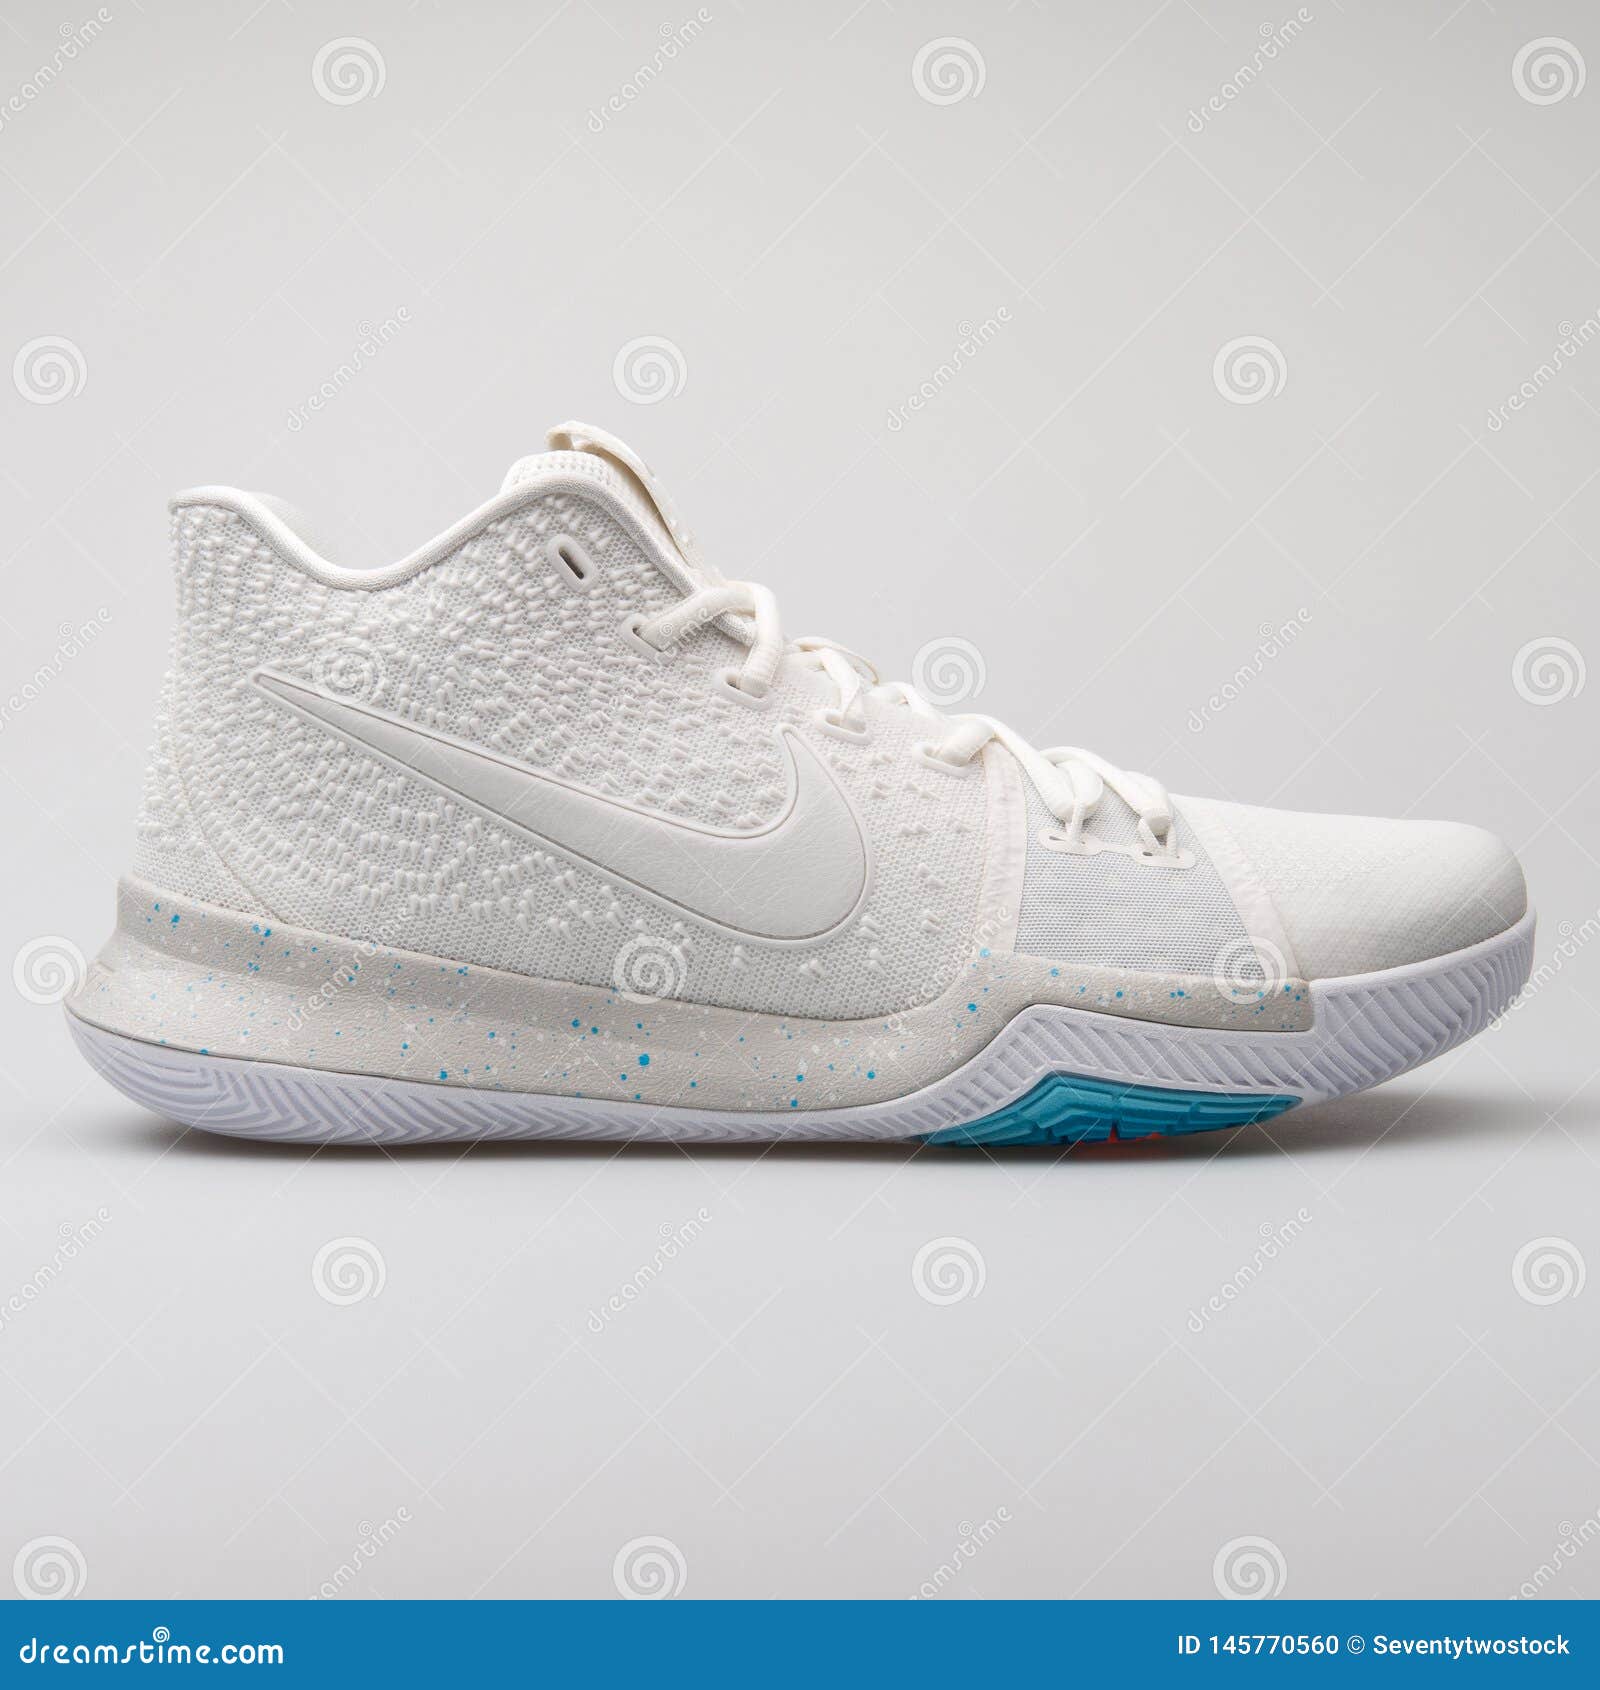 kyrie 3 white and silver